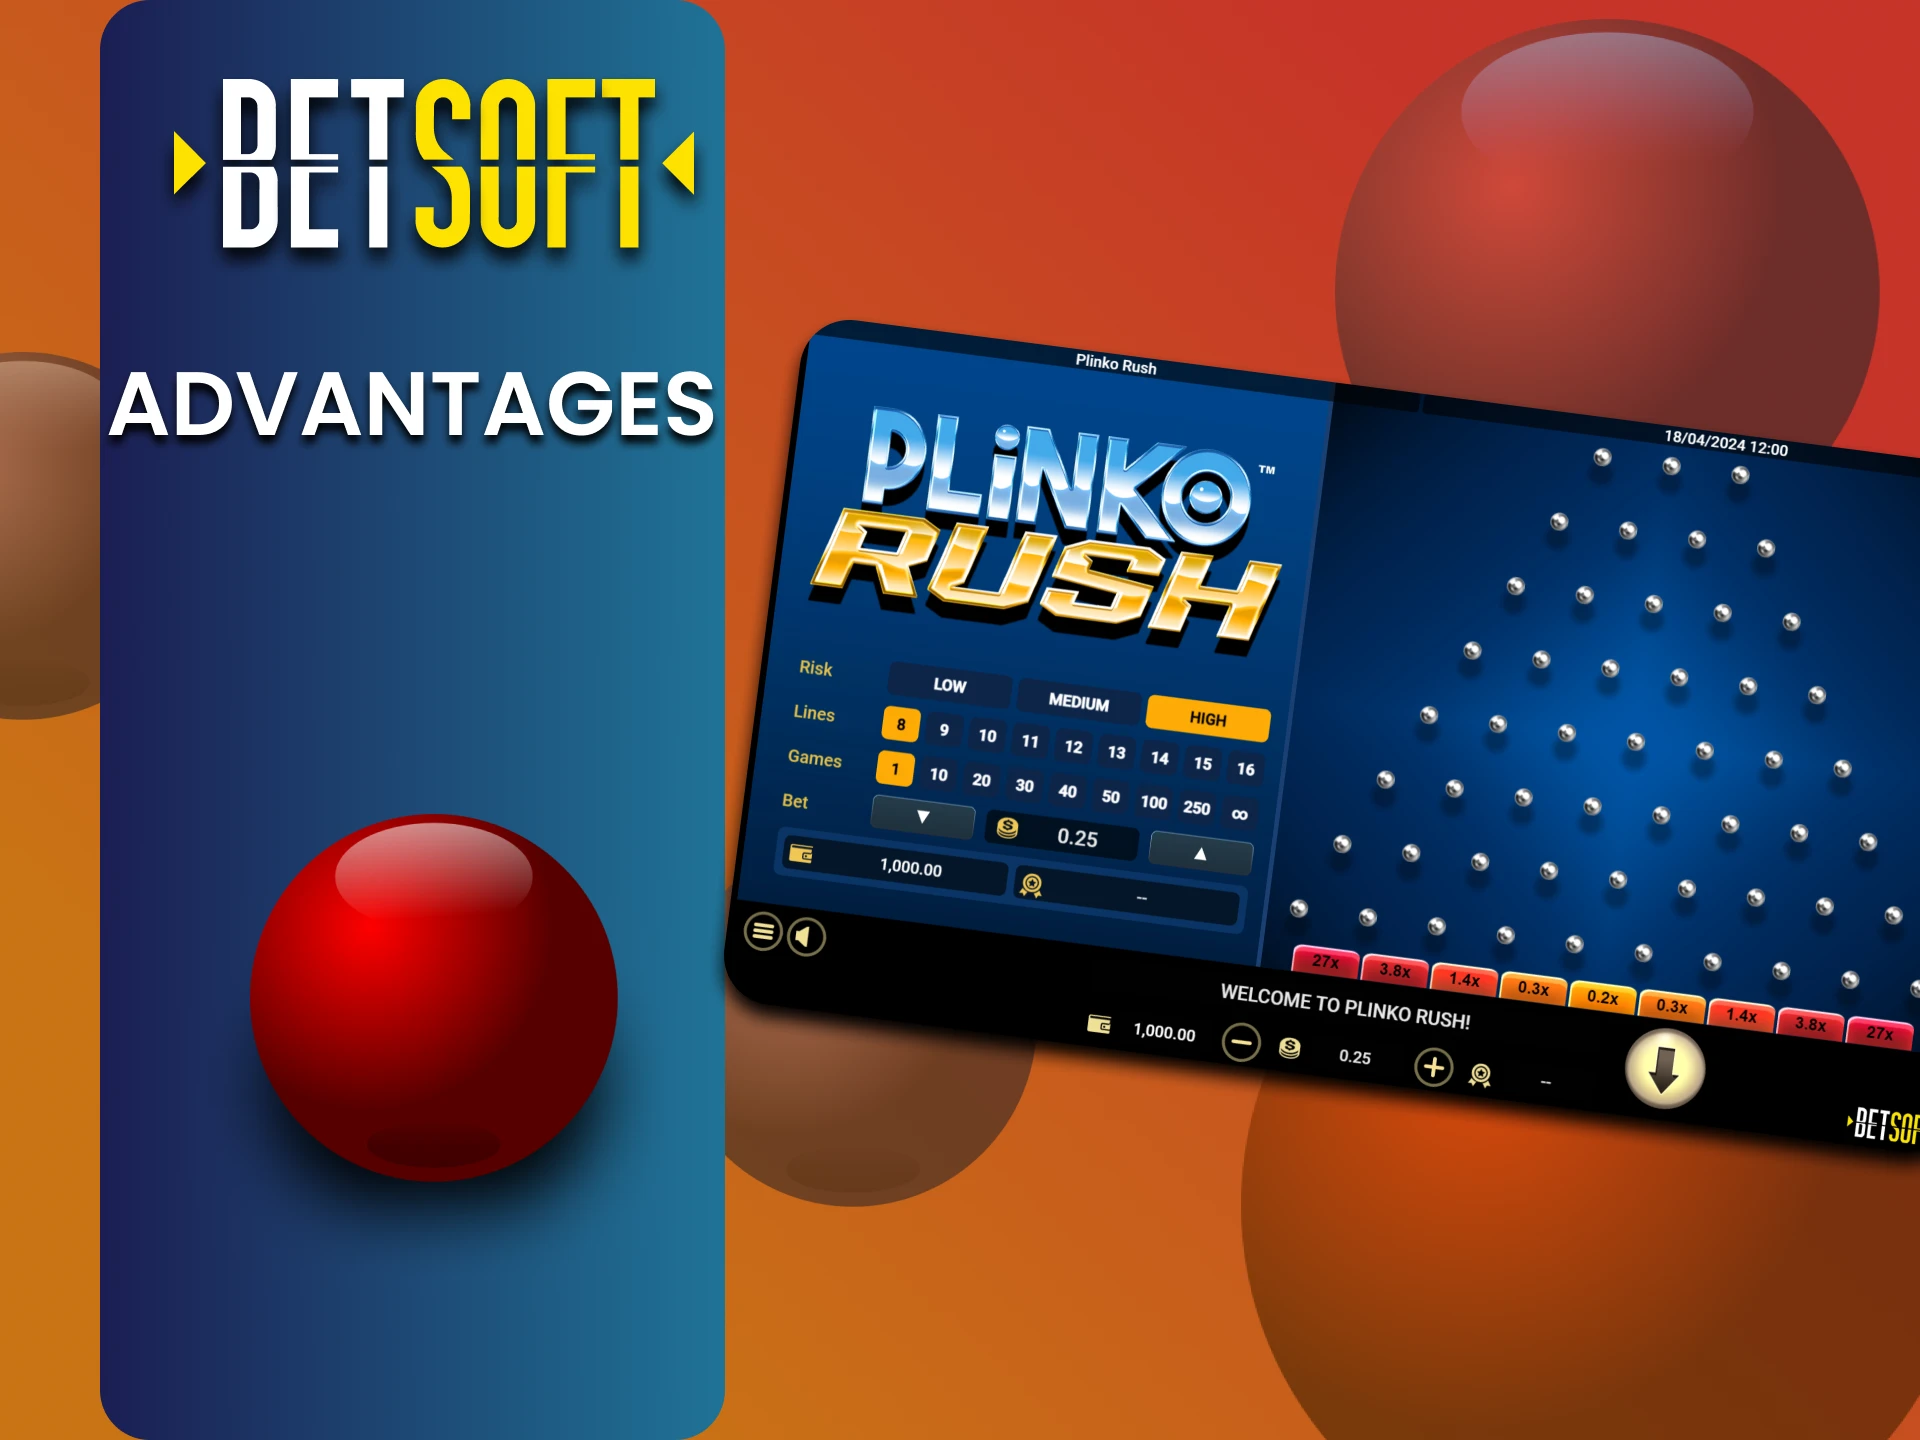 We will tell you about the benefits of Plinko Rush from Betsoft.